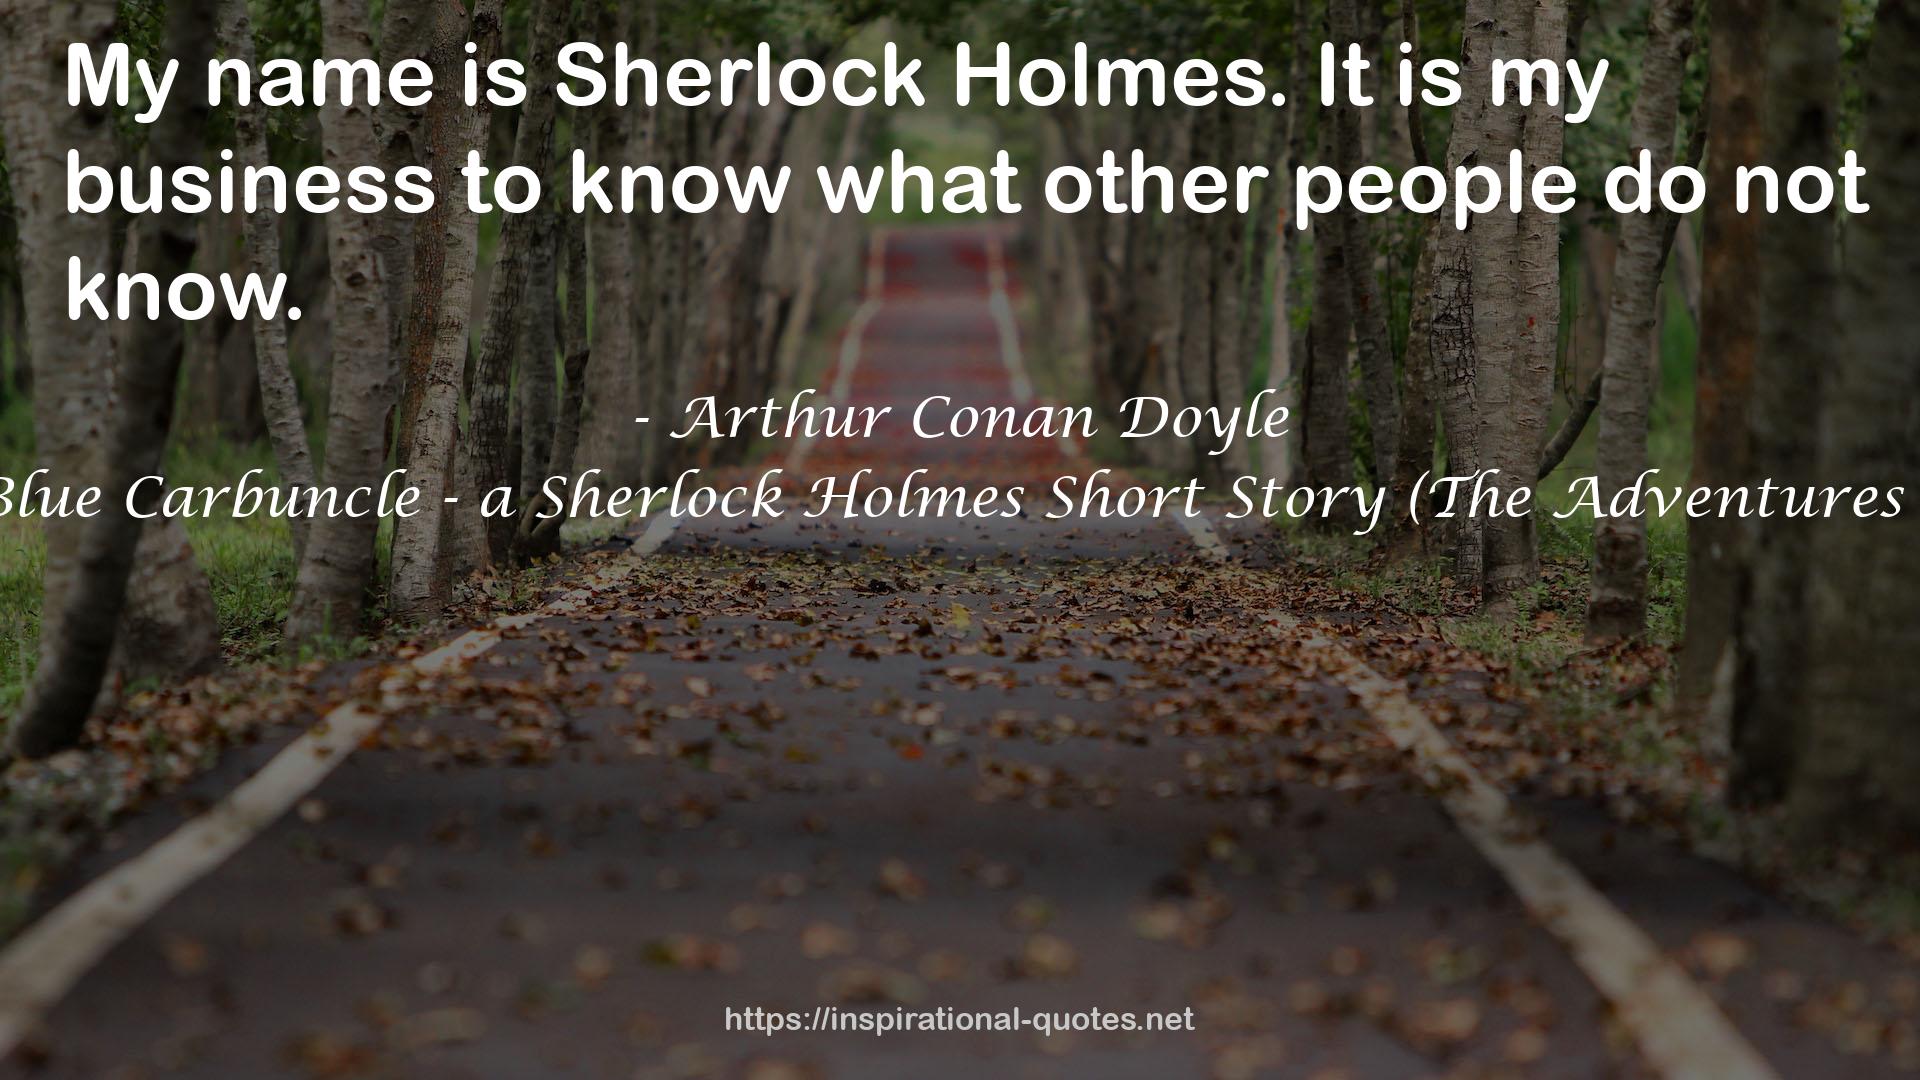 The Adventure of the Blue Carbuncle - a Sherlock Holmes Short Story (The Adventures of Sherlock Holmes, #7) QUOTES